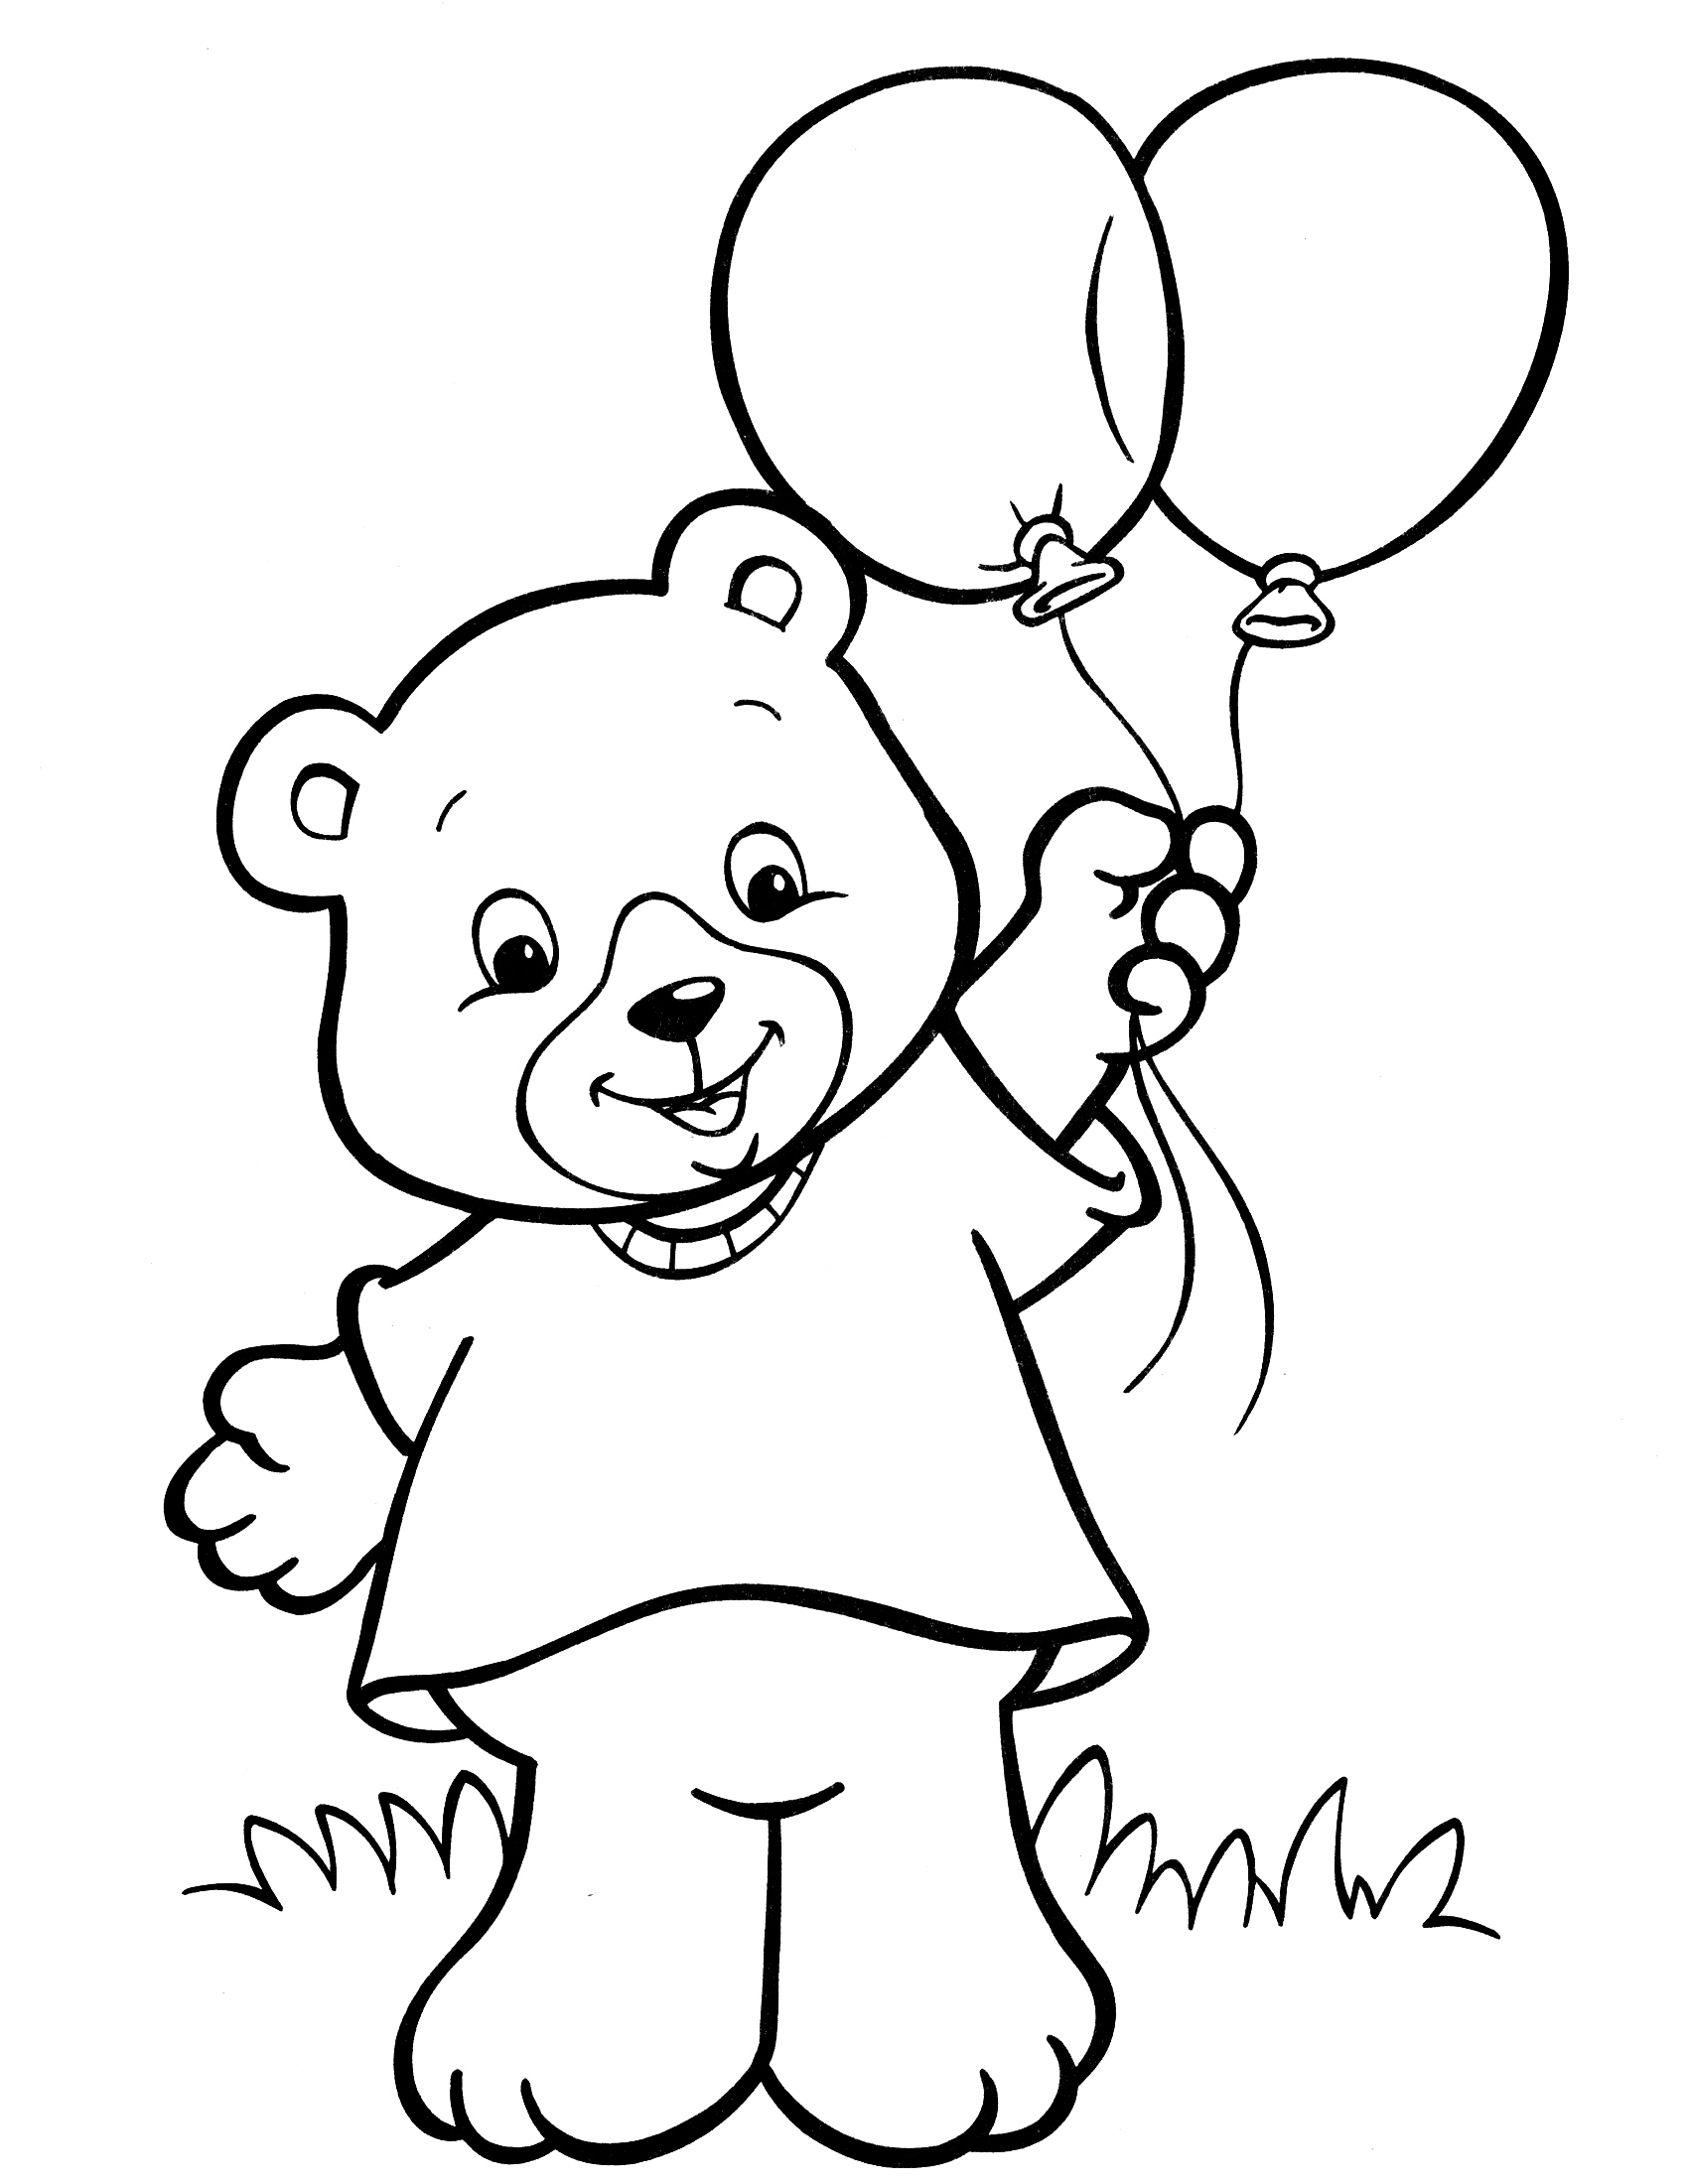 Coloring Pages : Www Free Coloring Pages To Print Crayola Printer - Free Printable Crayola Coupons